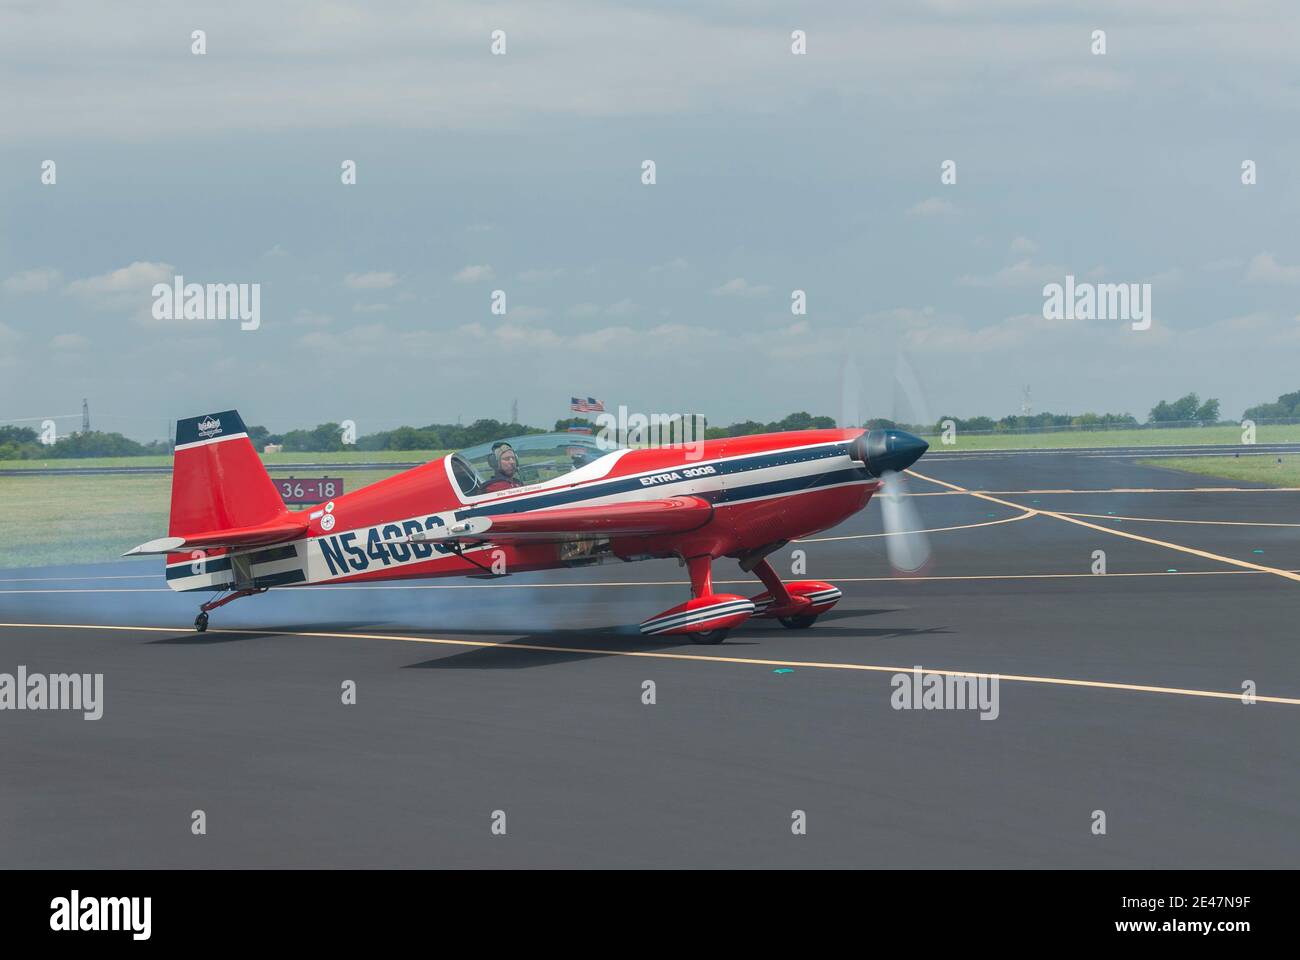 Fort Worth, Texas, USA, 17 th Jun 2012. Old Vintage airplane on the runway Stock Photo